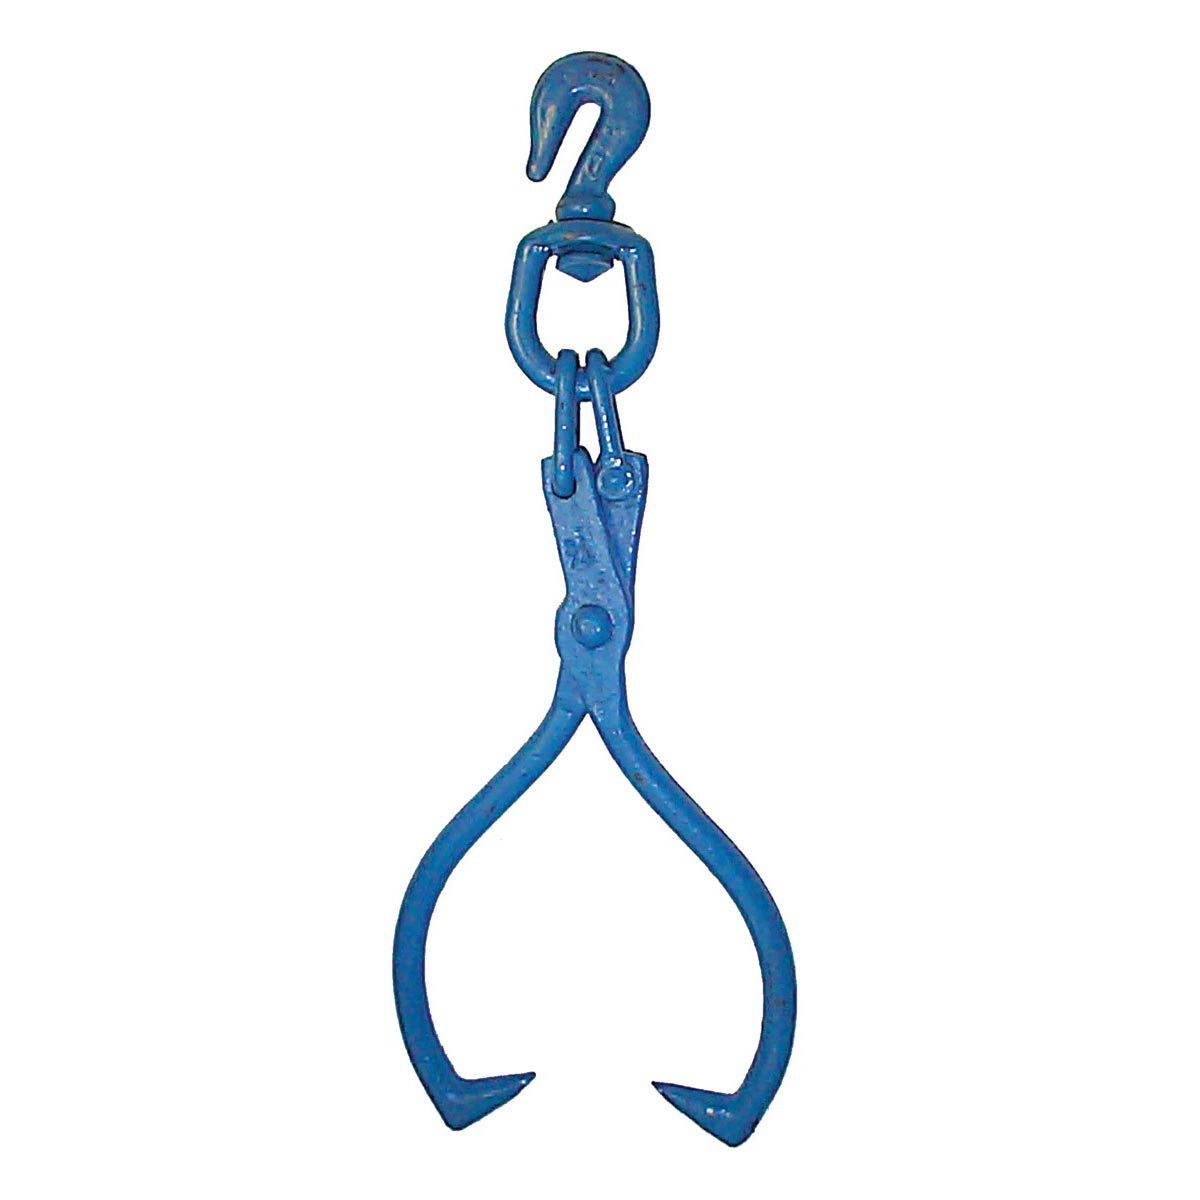 Columbus McKinnon Dixie Forged Ring Skidding Tongs: 1" Tong - Opens to 25" - with Swivel Grab Hook